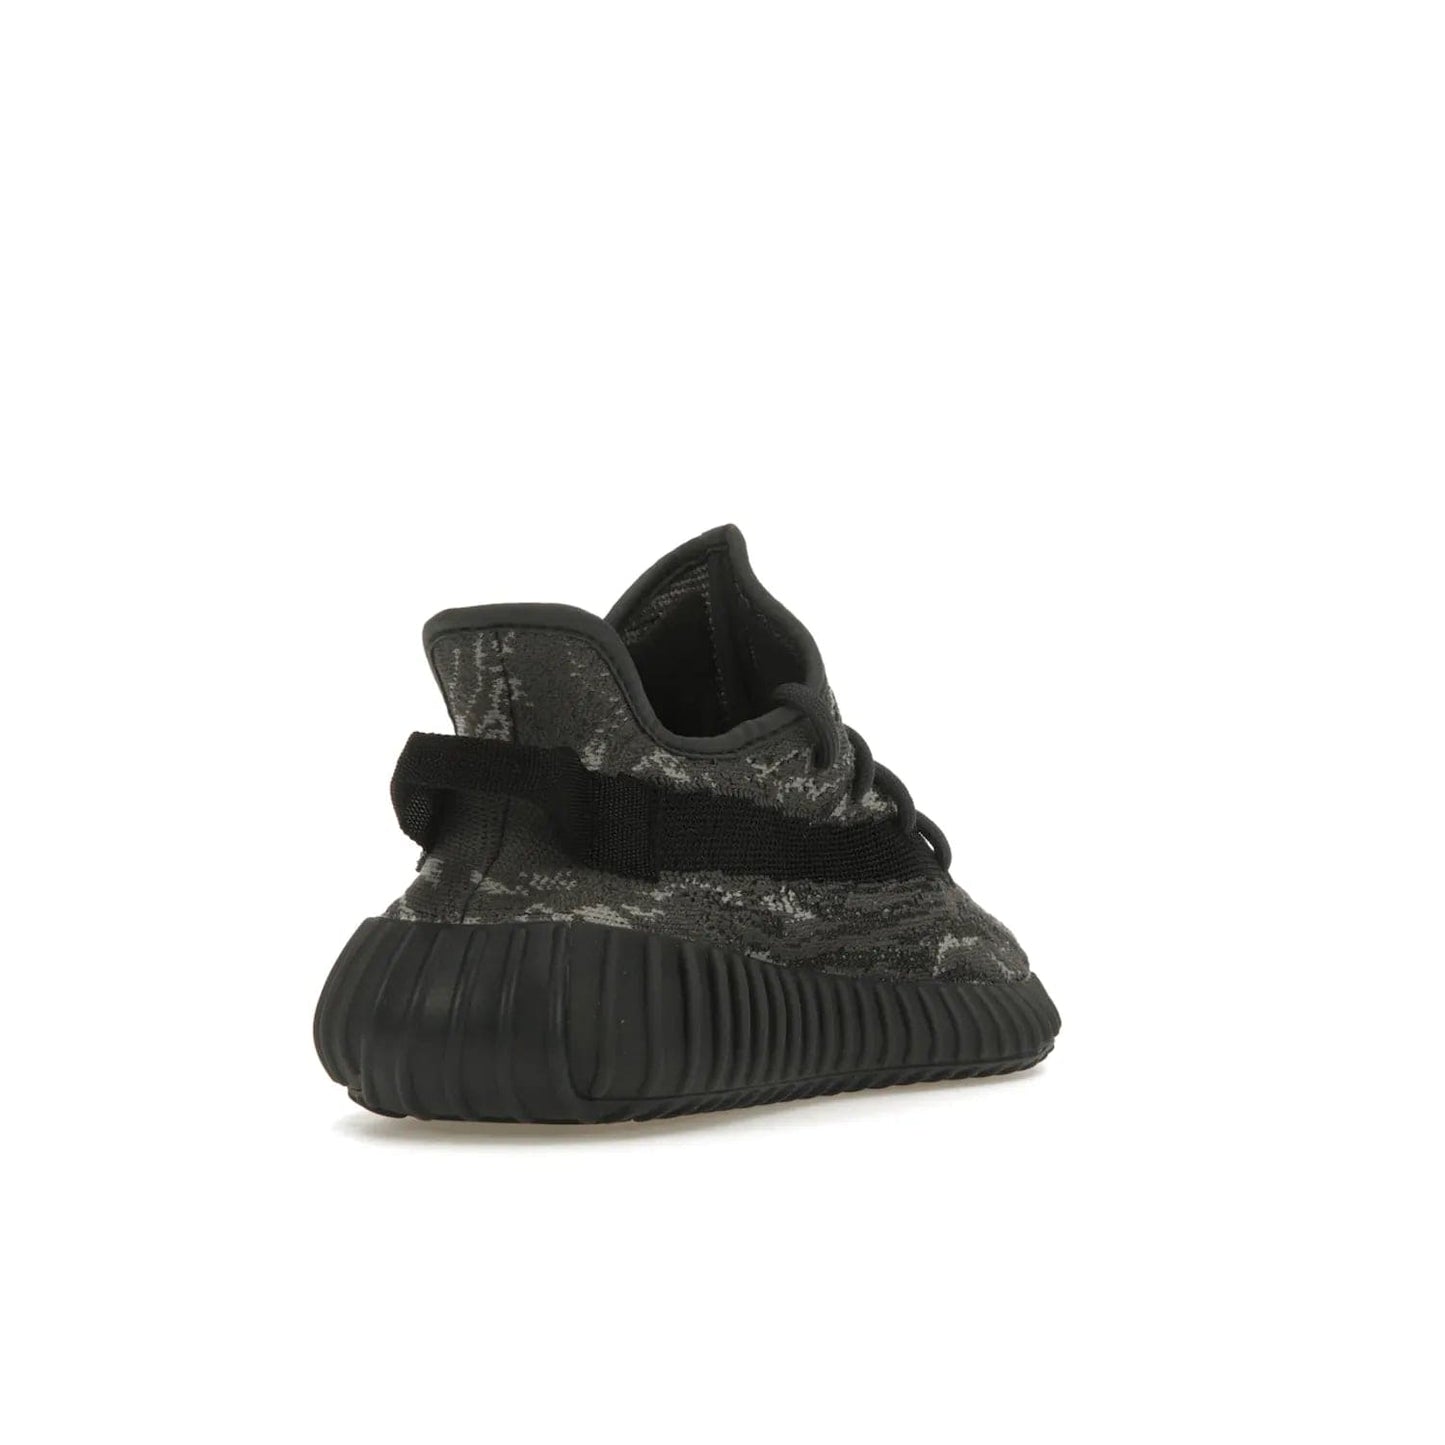 adidas Yeezy Boost 350 V2 MX Dark Salt - Image 31 - Only at www.BallersClubKickz.com - ##
The adidas Yeezy Boost 350 V2 MX Dark Salt offers a contemporary look with a signature combination of grey and black hues. Cushioned Boost midsole and side stripe allow for all day wear. Get the perfect fashion-forward addition with this sleek sneaker for $230.